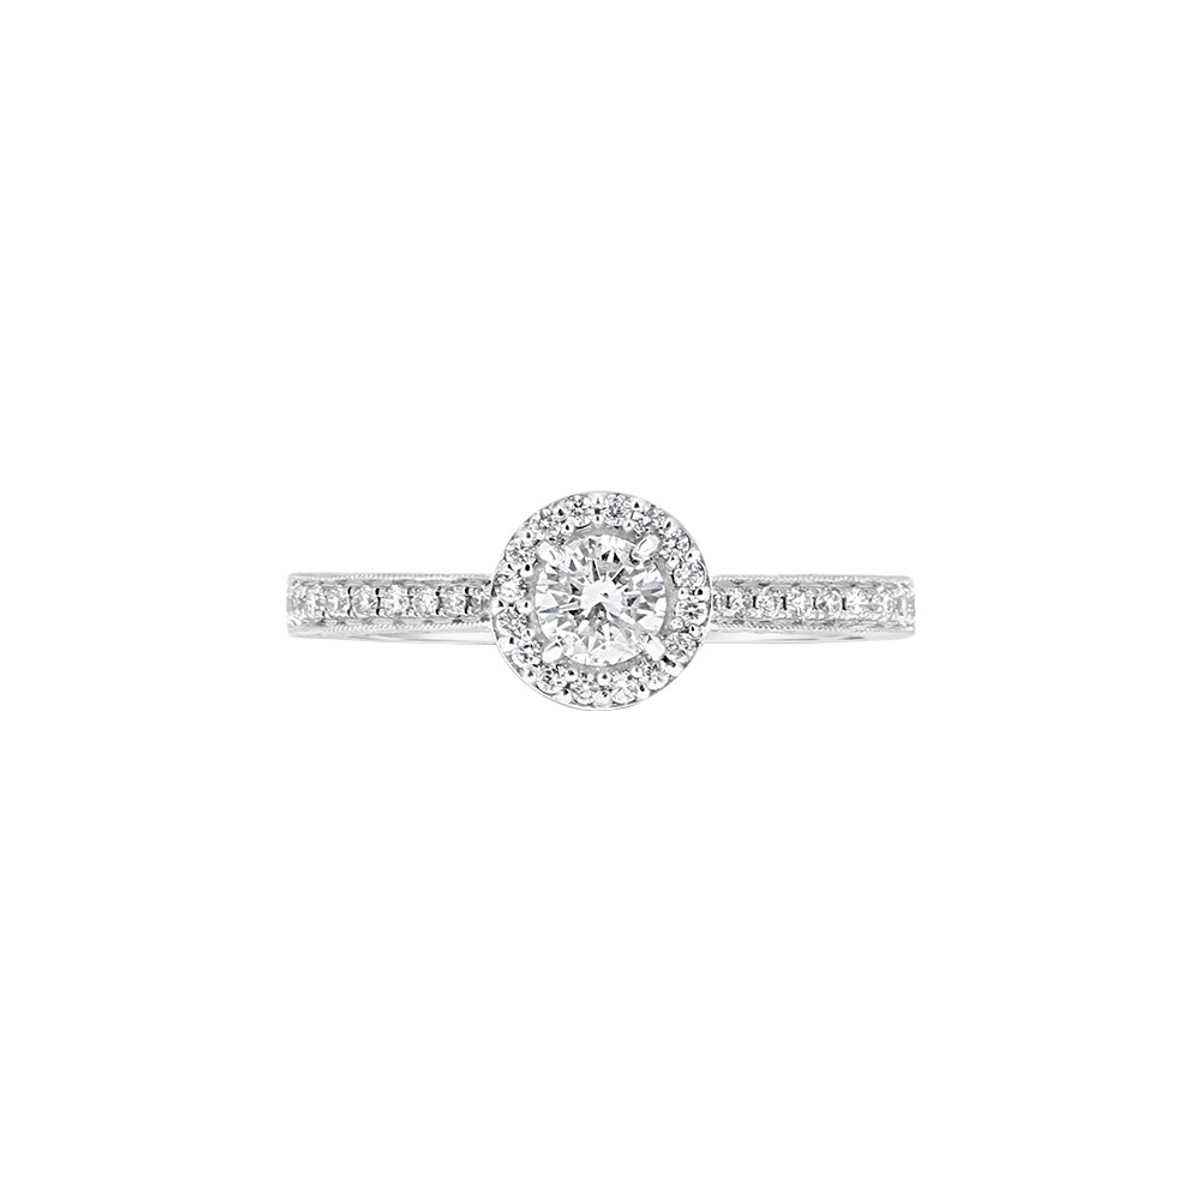 Engage 18KT White Gold & Diamond Solitaire Halo Engagement Ring Product Image